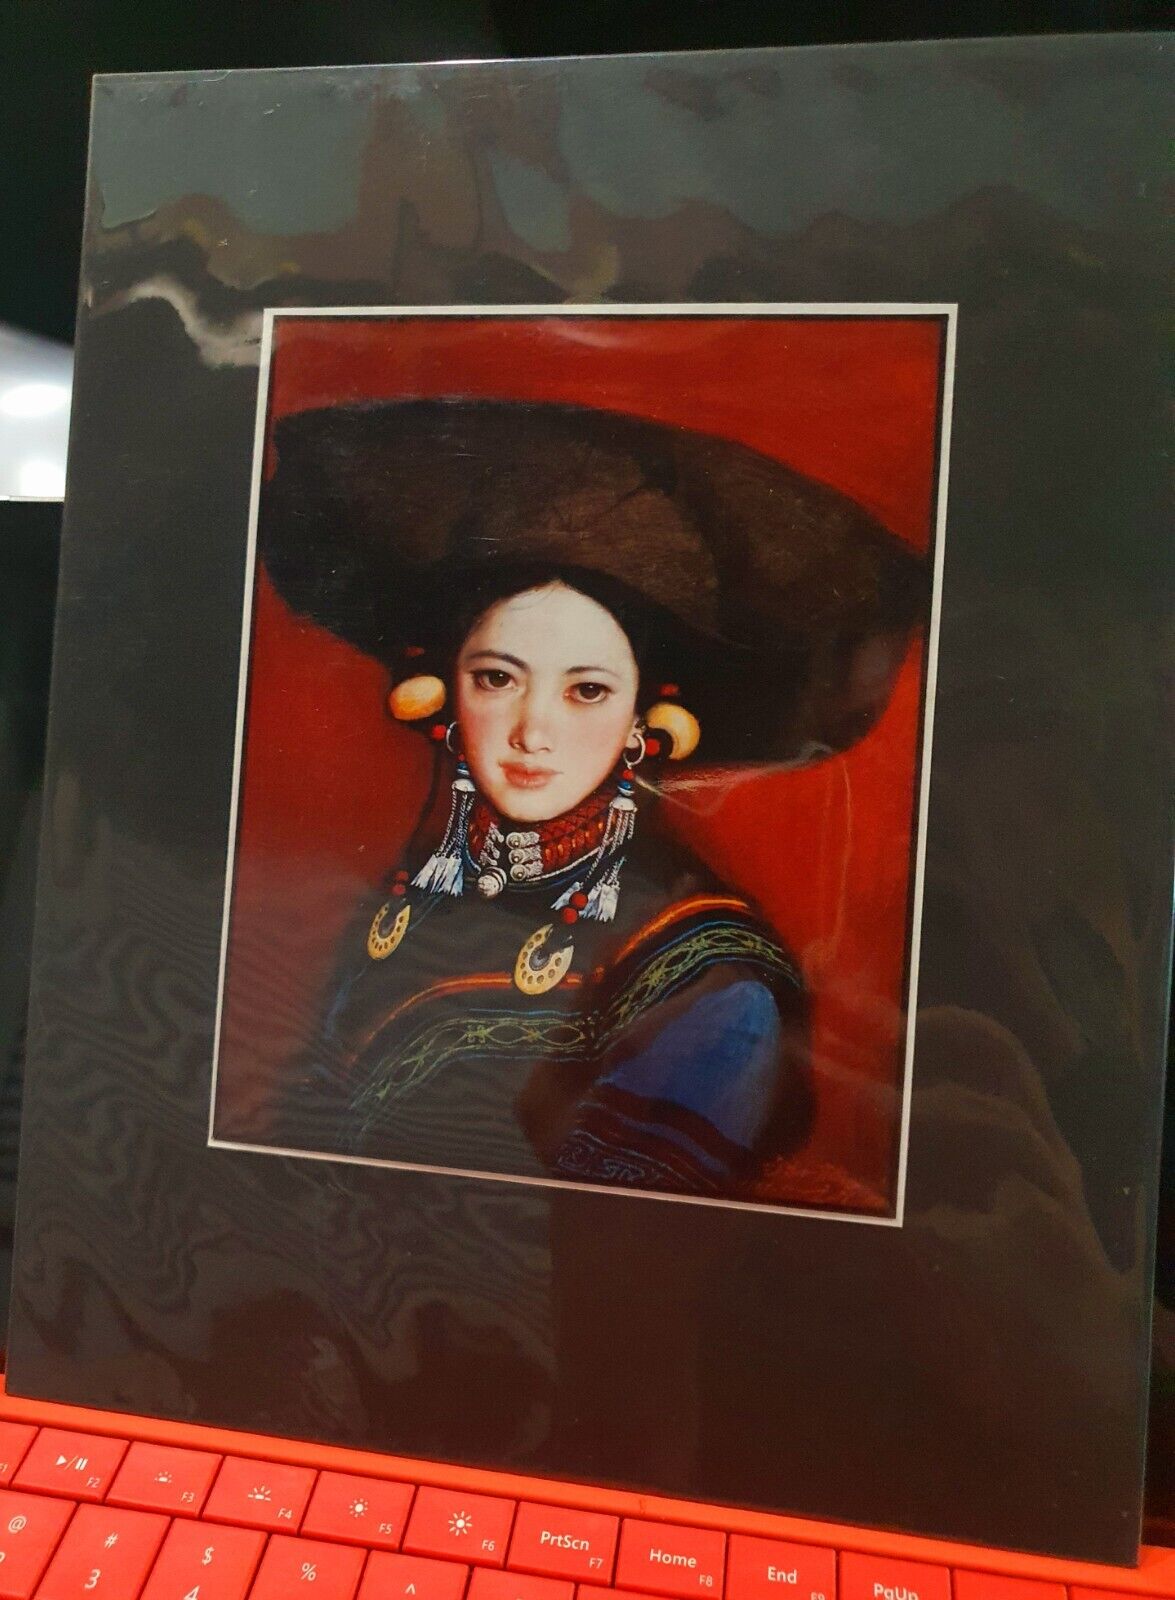 Chinese Artist Gao Xiao-Hua Reproduction Prints of Paintings of Yi Ethnic Group Без бренда - фотография #2